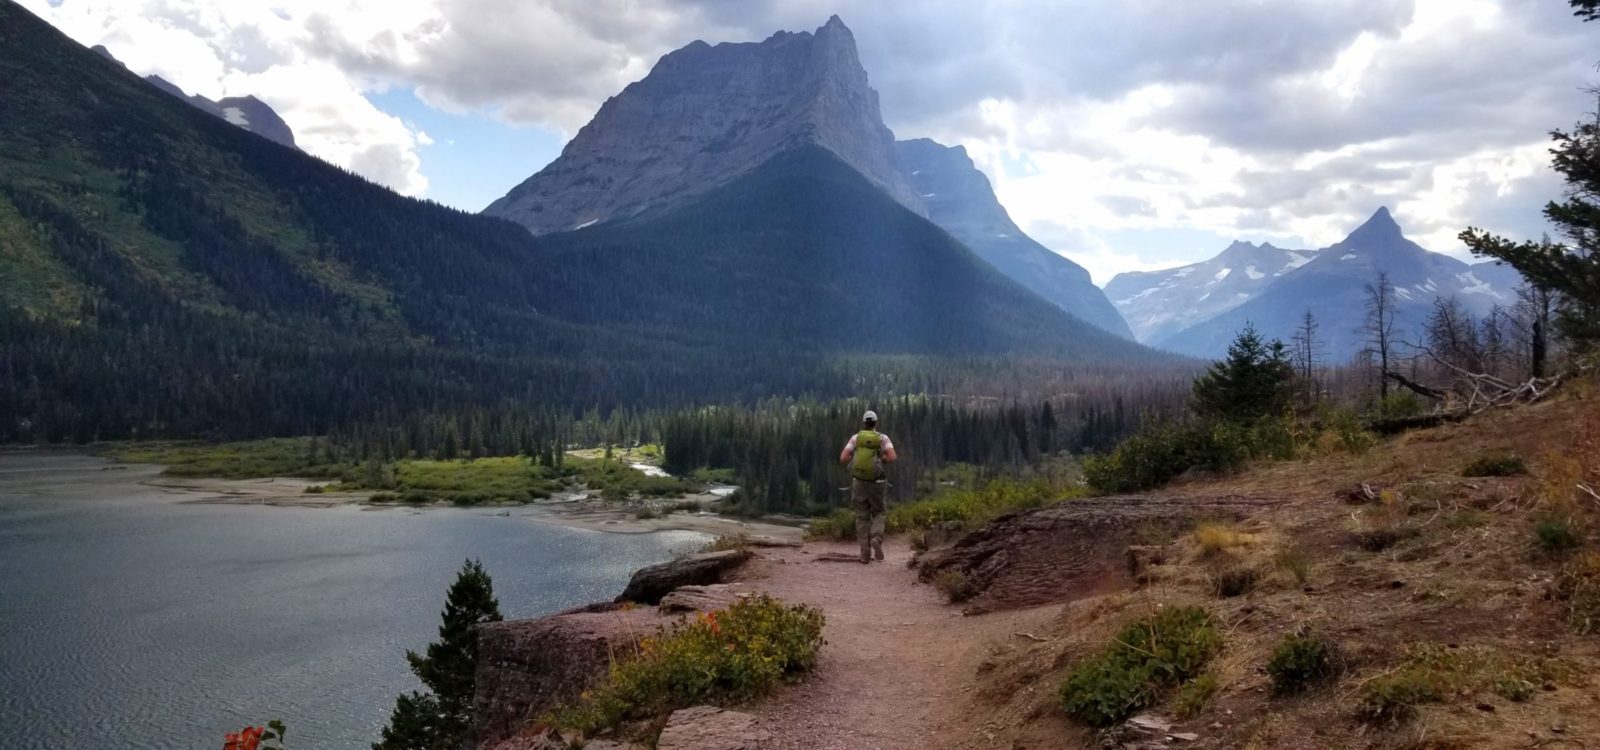 Beautiful views hiking around St. Mary Lake in Glacier National Park